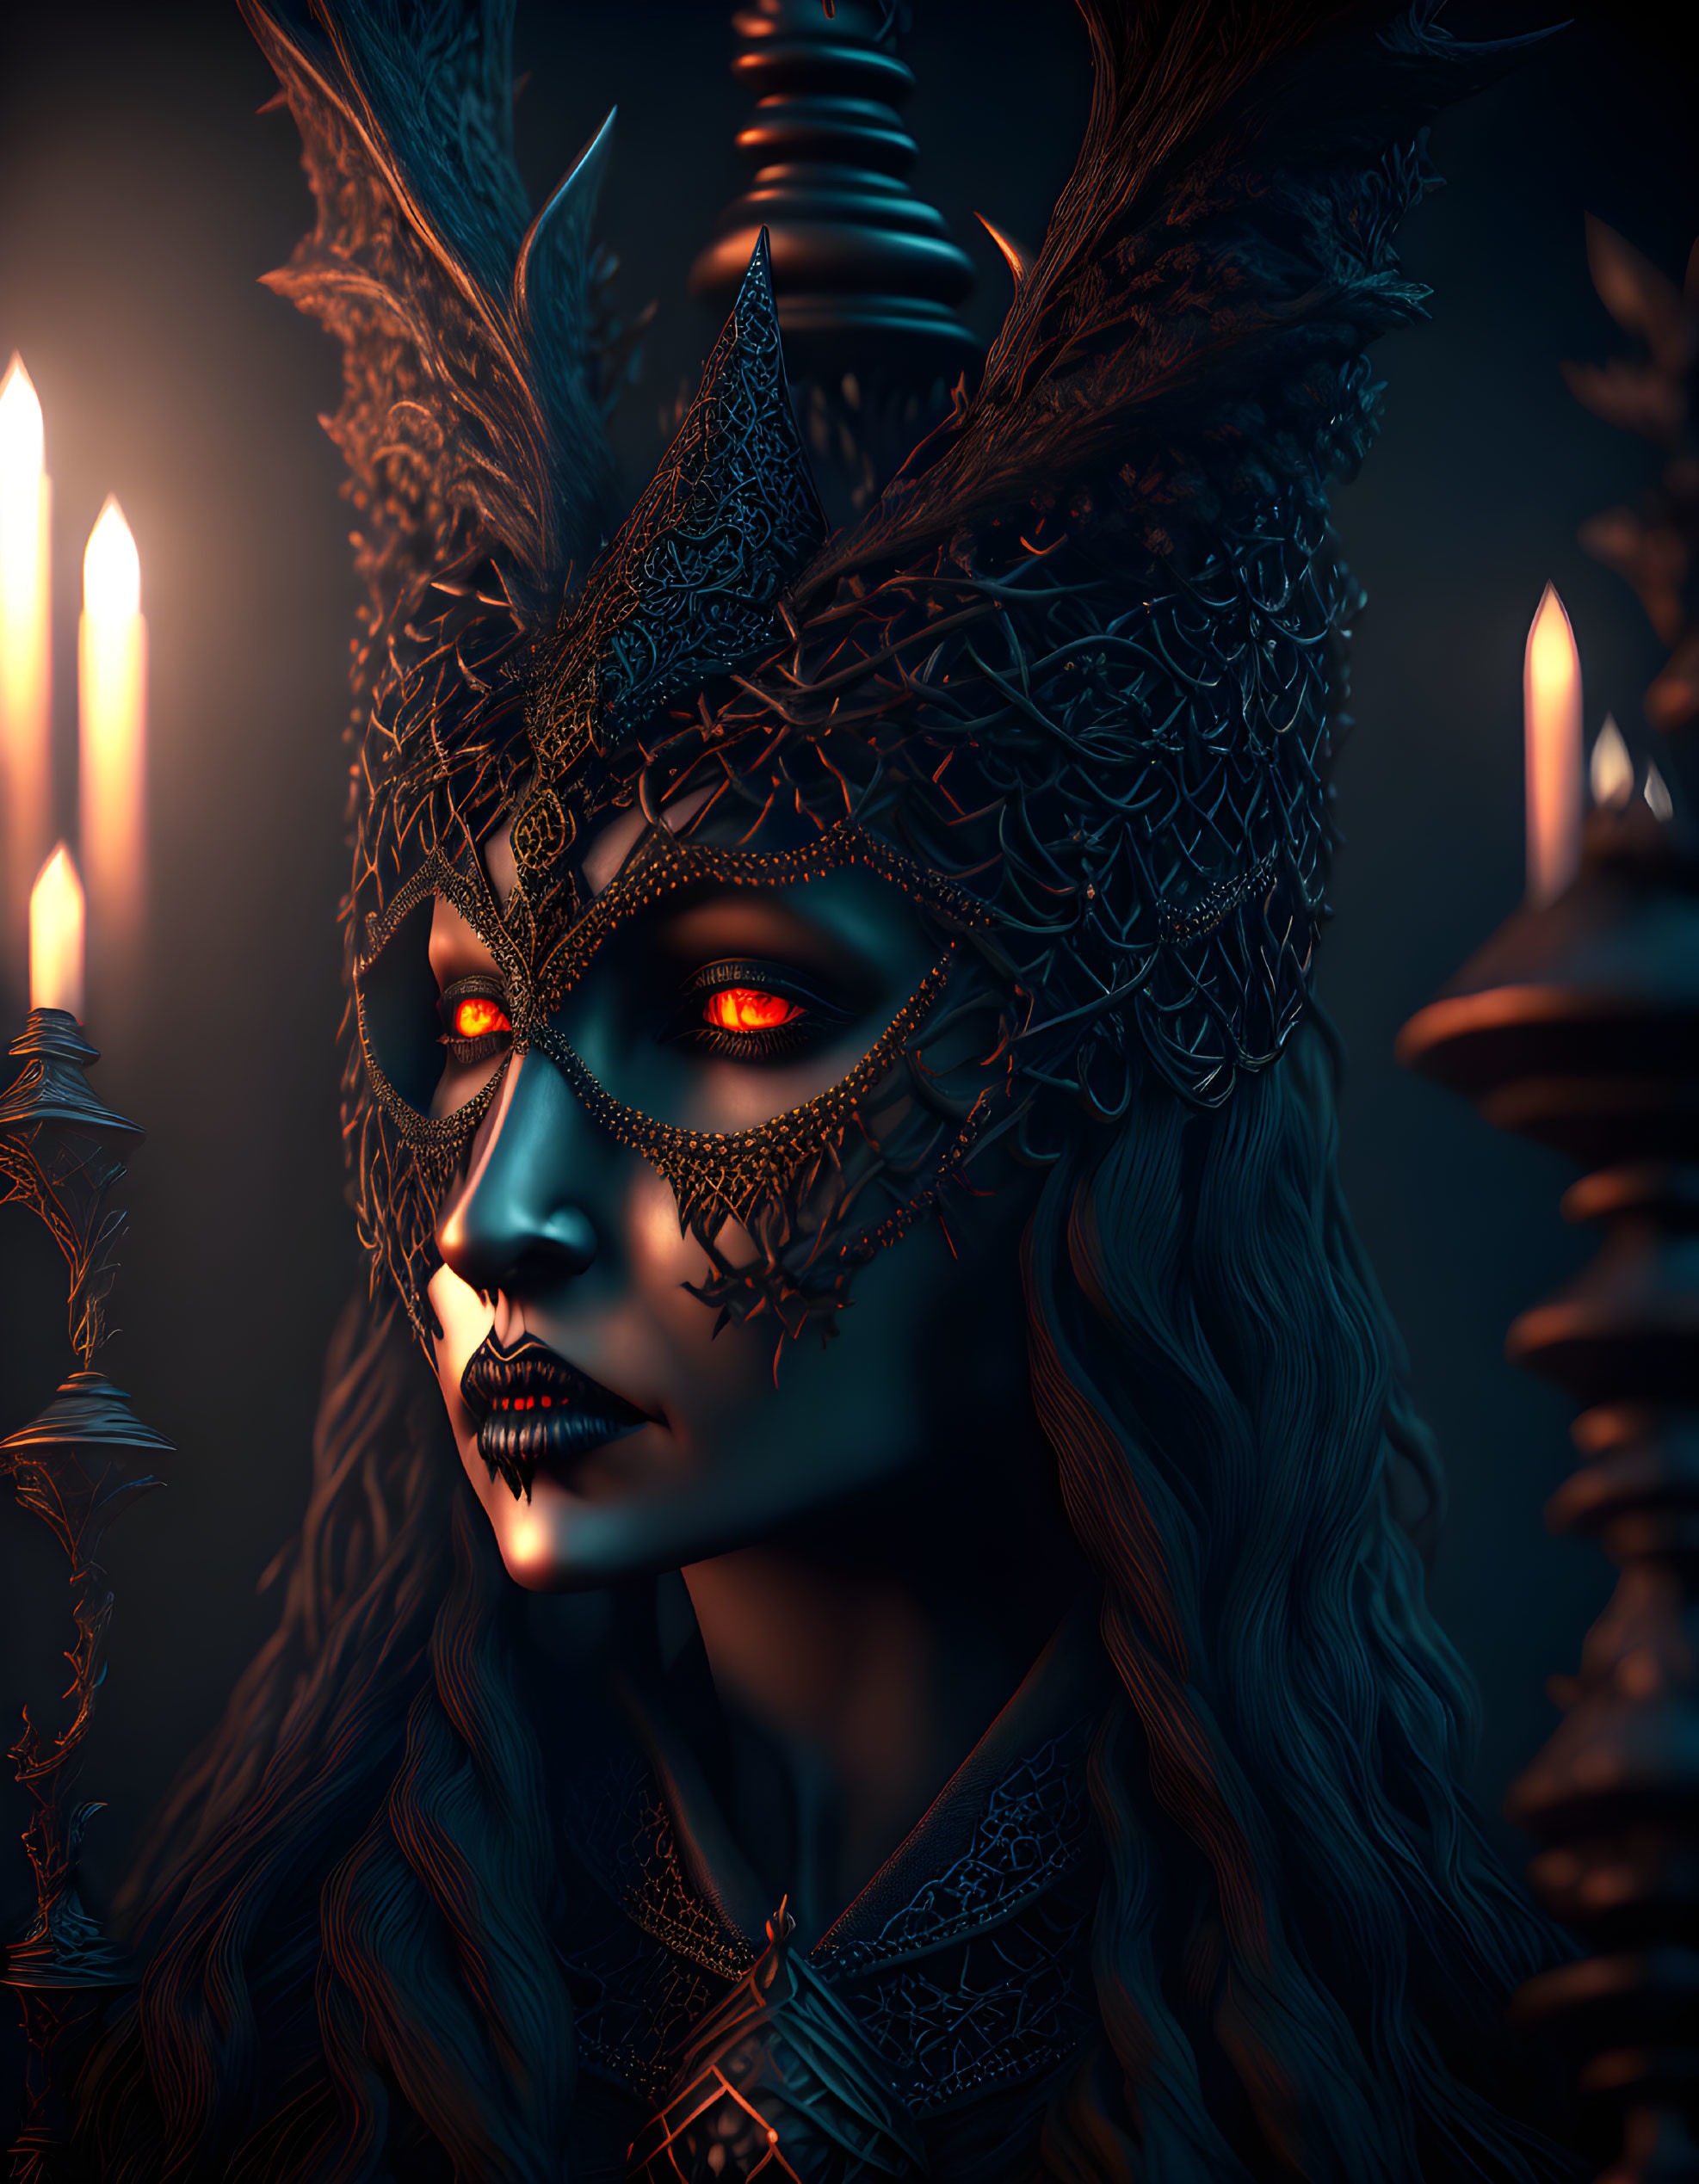 Mystical figure with glowing red eyes and ornate headgear surrounded by lit candles